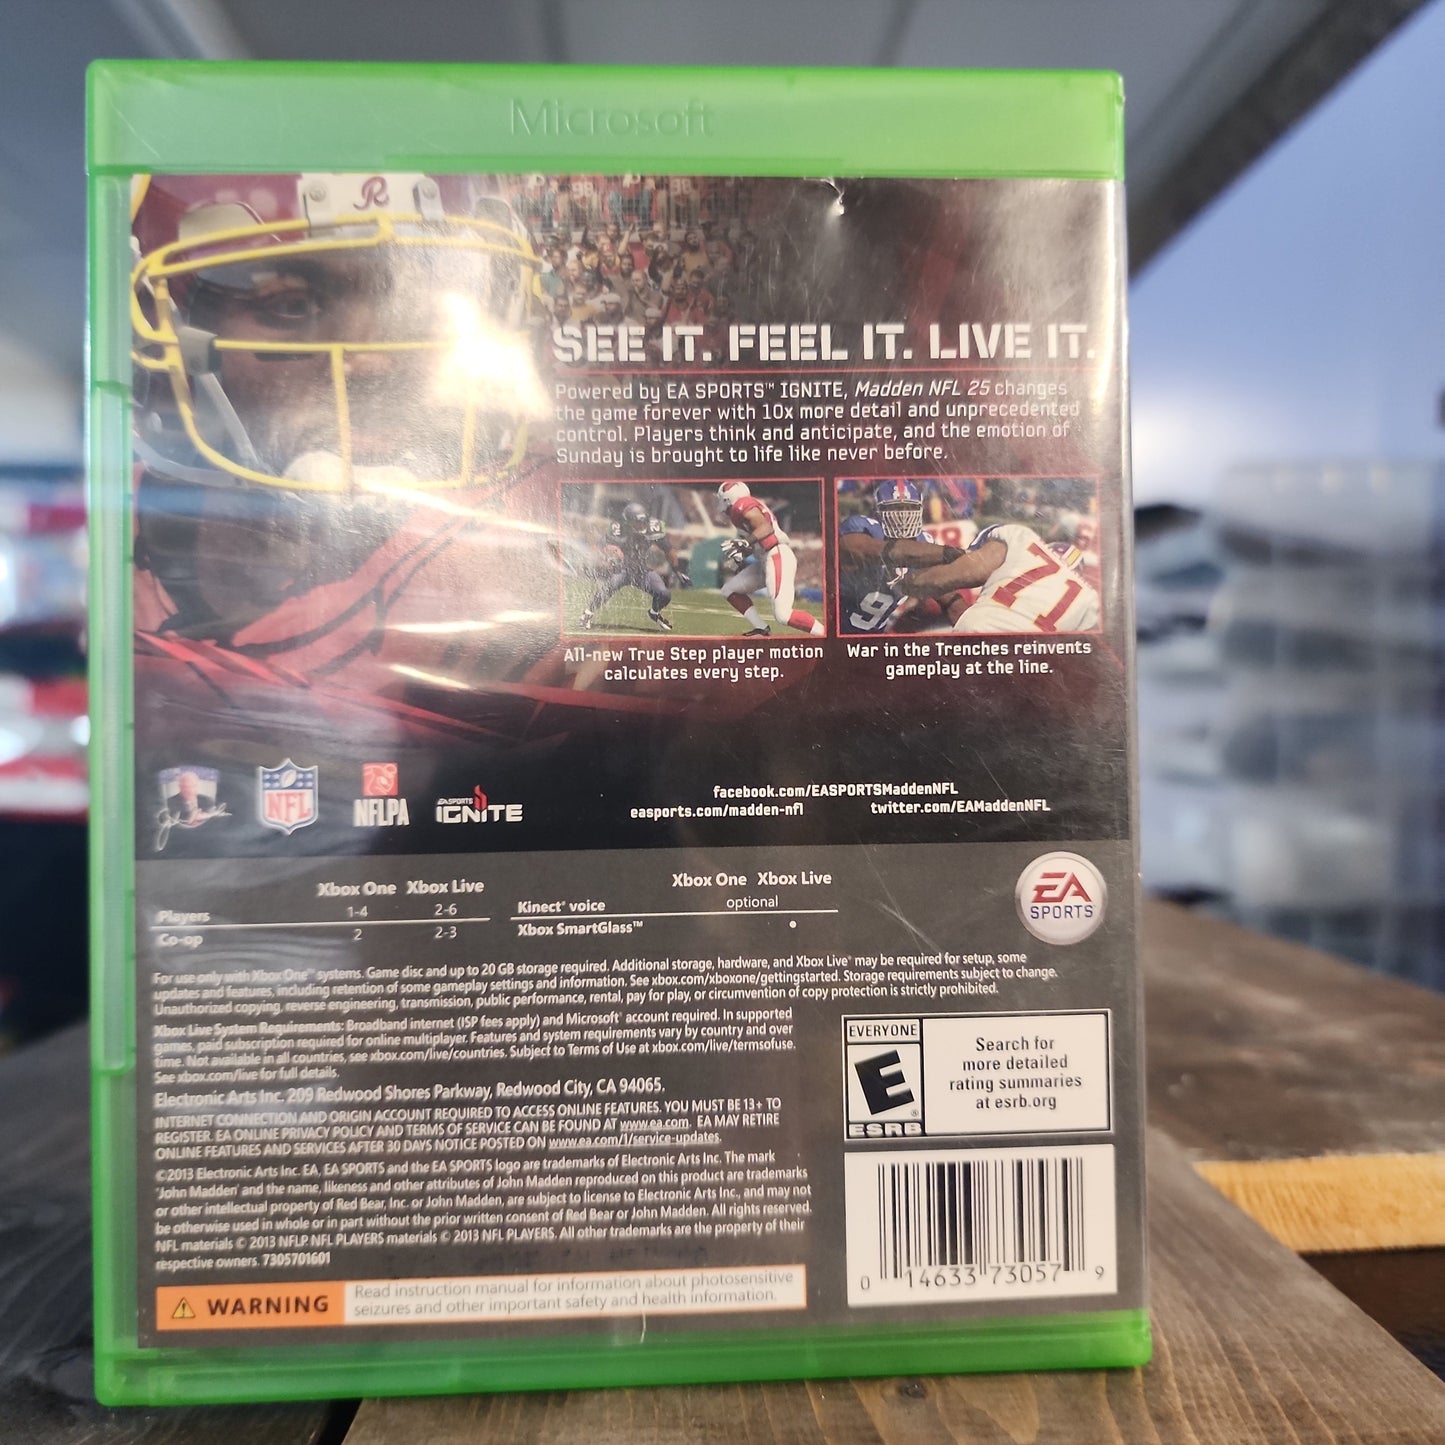 Xbox One - Madden 25 Retrograde Collectibles Adrian Peterson, American Football, Barry Sanders, CIB, EA Sports, Football, Madden, National Footba Preowned Video Game 